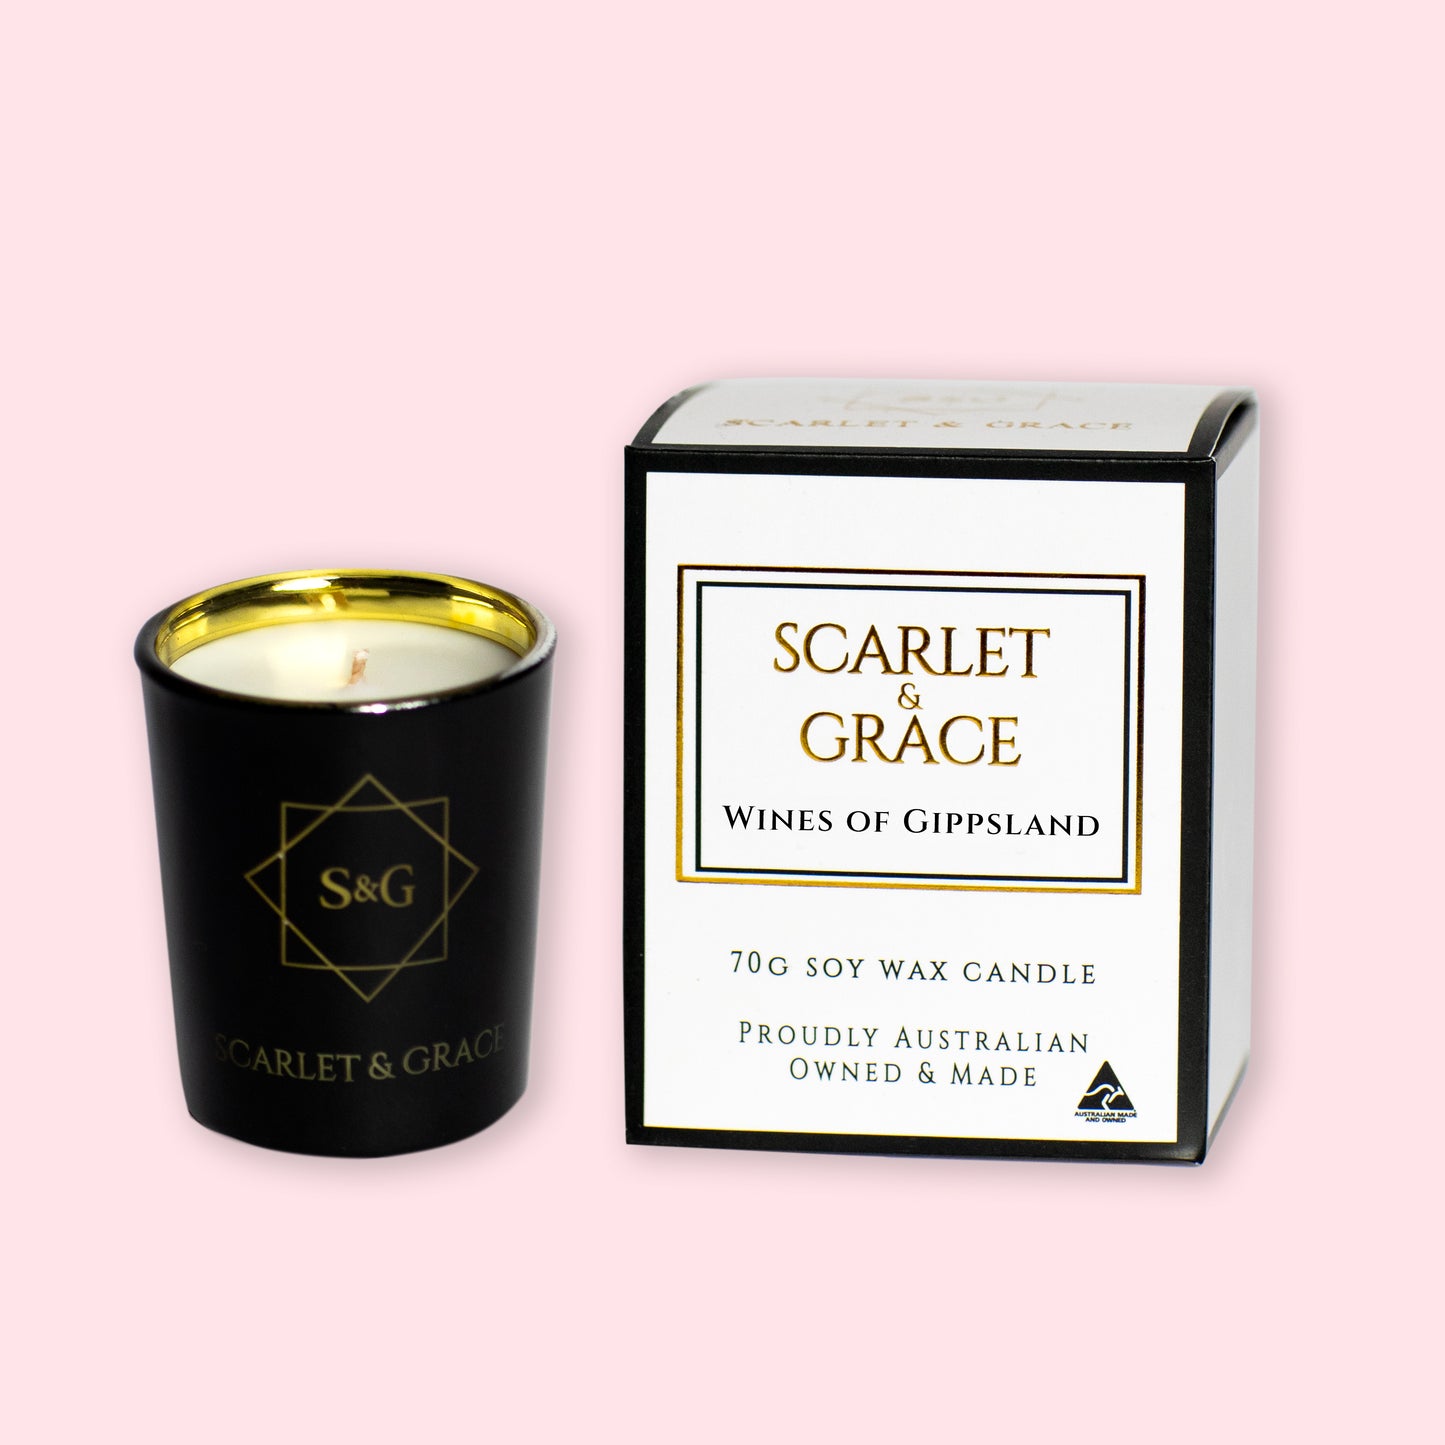 Wines of Gippsland - 70gm Soy Wax Candle - Scarlet & Grace